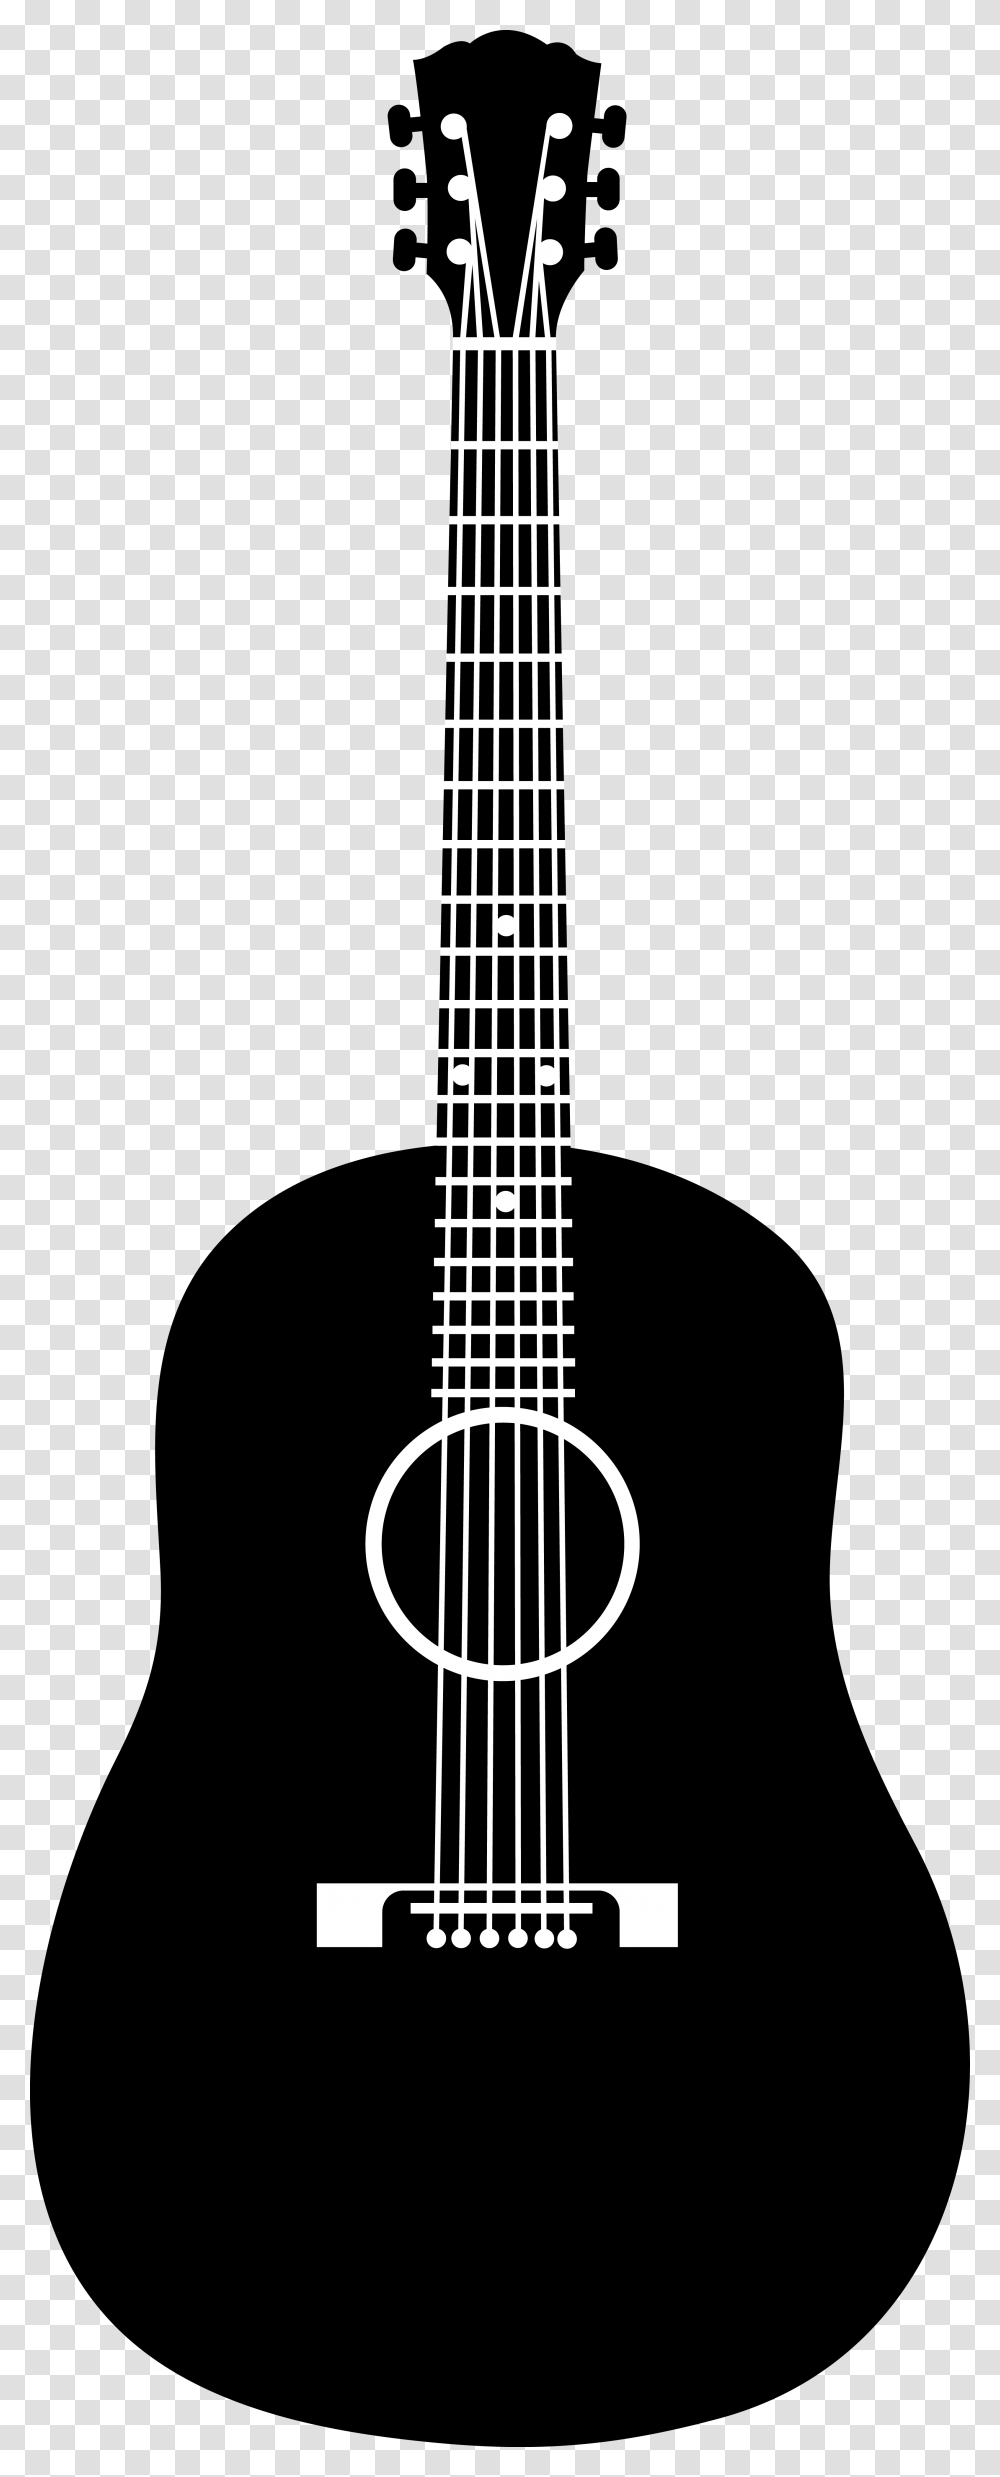 Guitar Silhouette Acoustic Guitar Clipart Black And White, Leisure Activities, Musical Instrument, Bass Guitar, Label Transparent Png